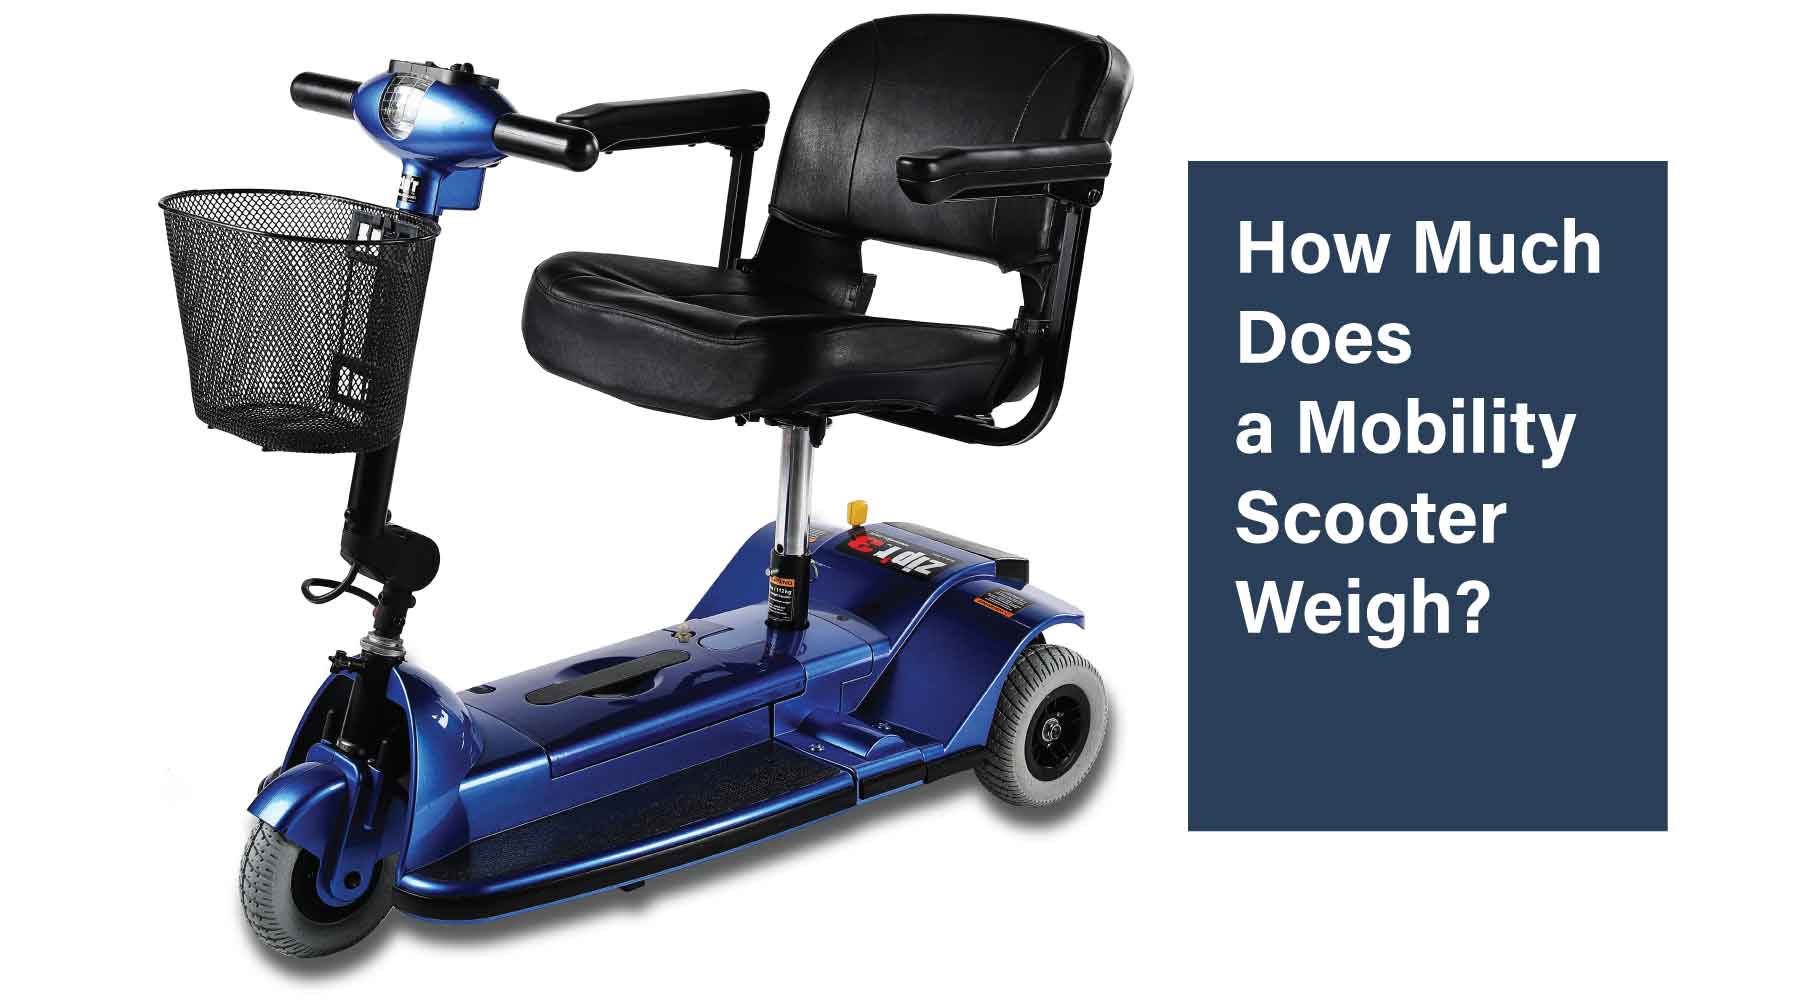 How Much Does a Mobility Scooter Weigh?